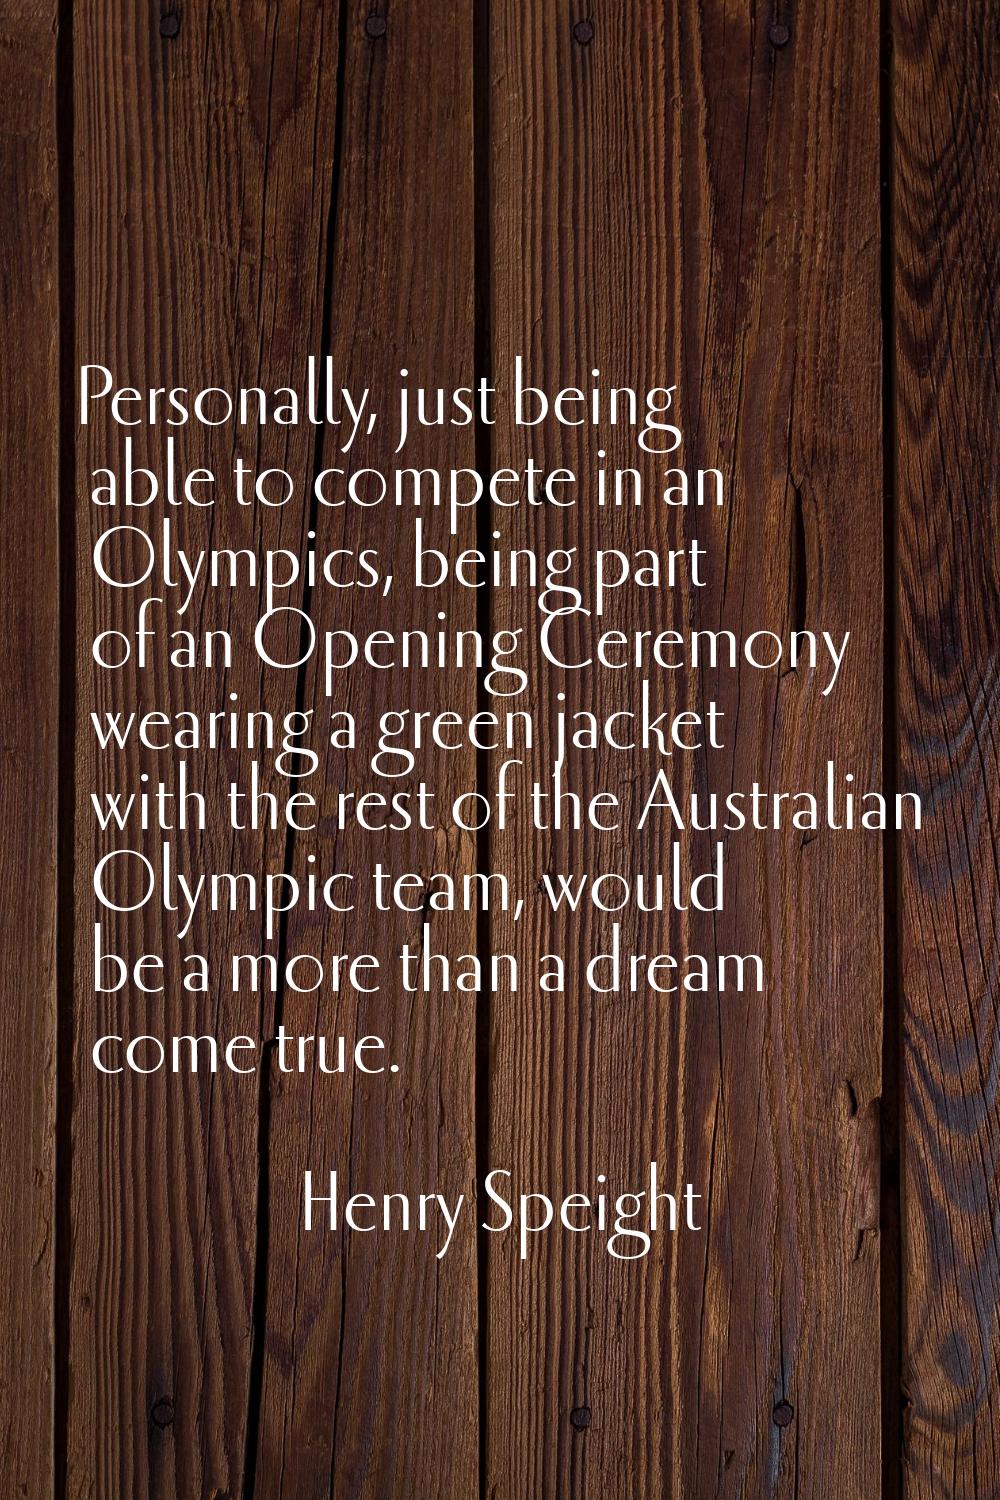 Personally, just being able to compete in an Olympics, being part of an Opening Ceremony wearing a 